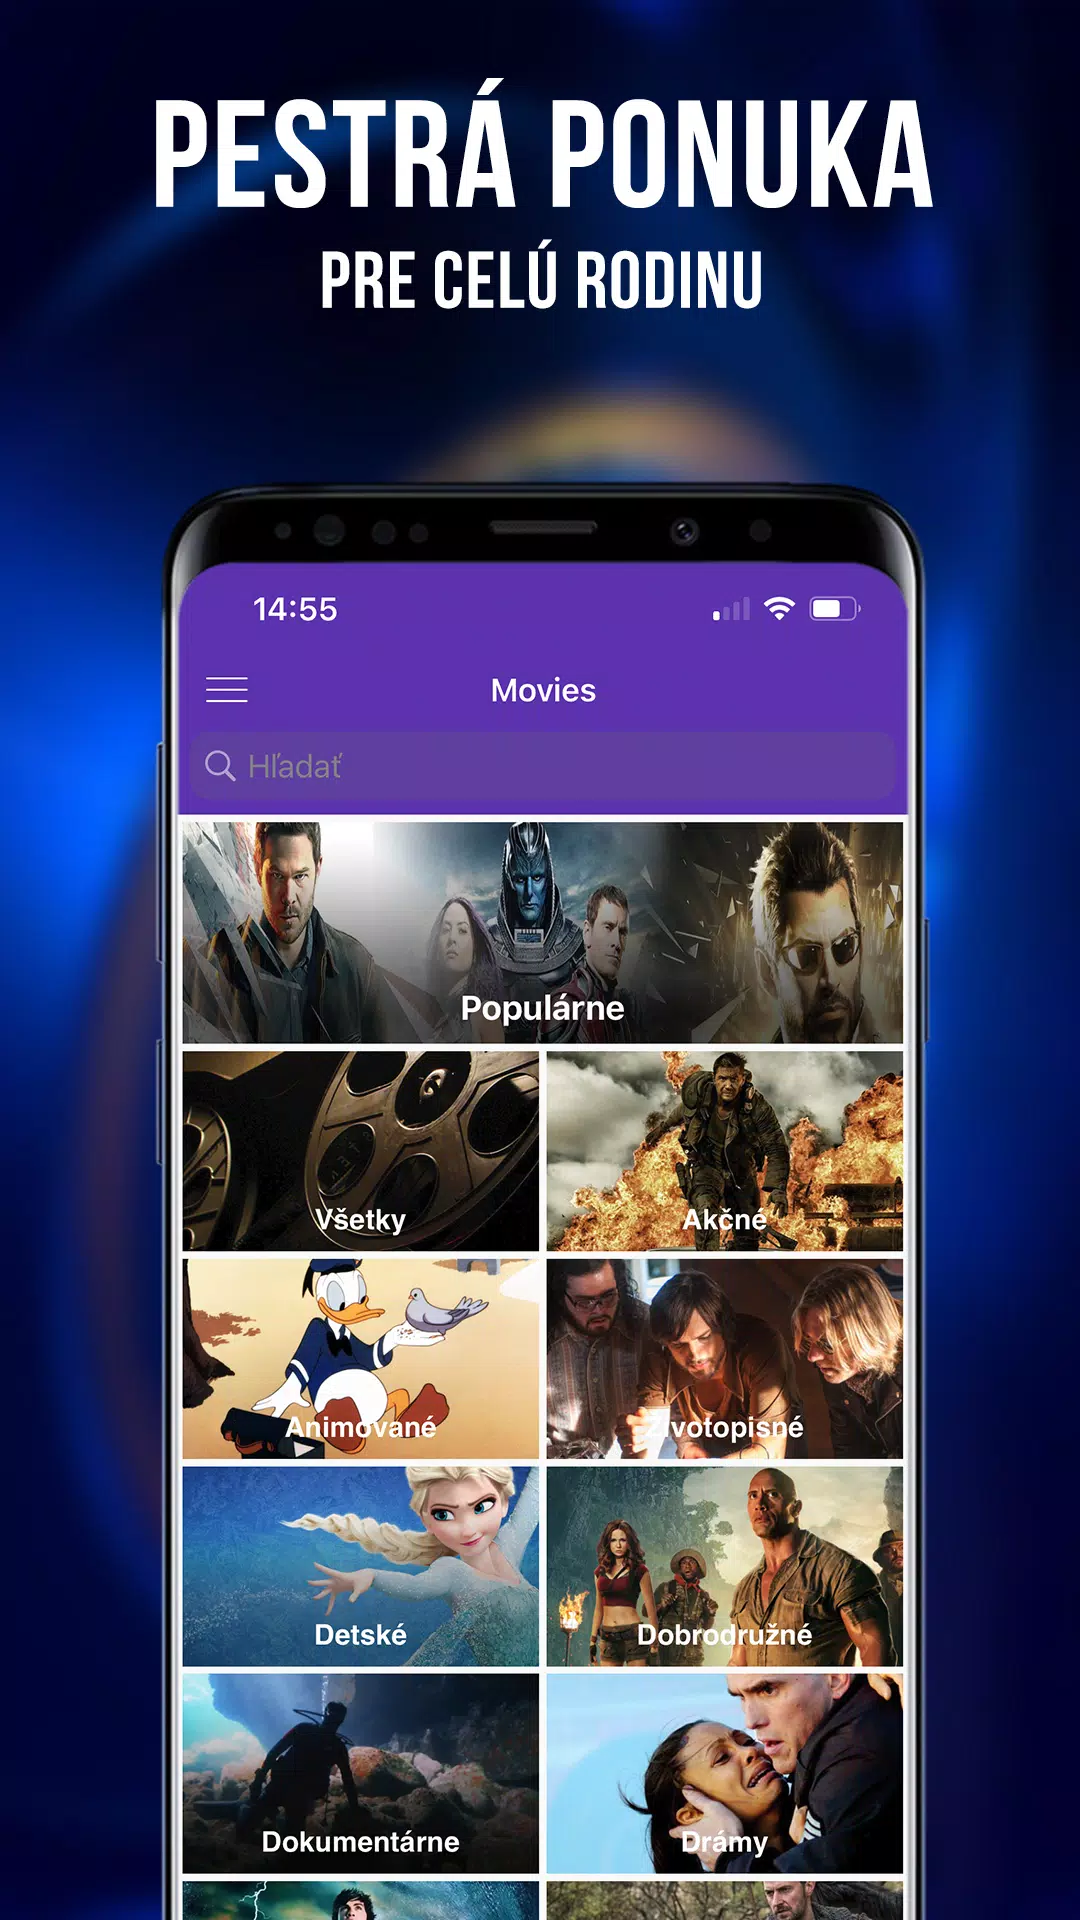 Antik TV APK for Android Download